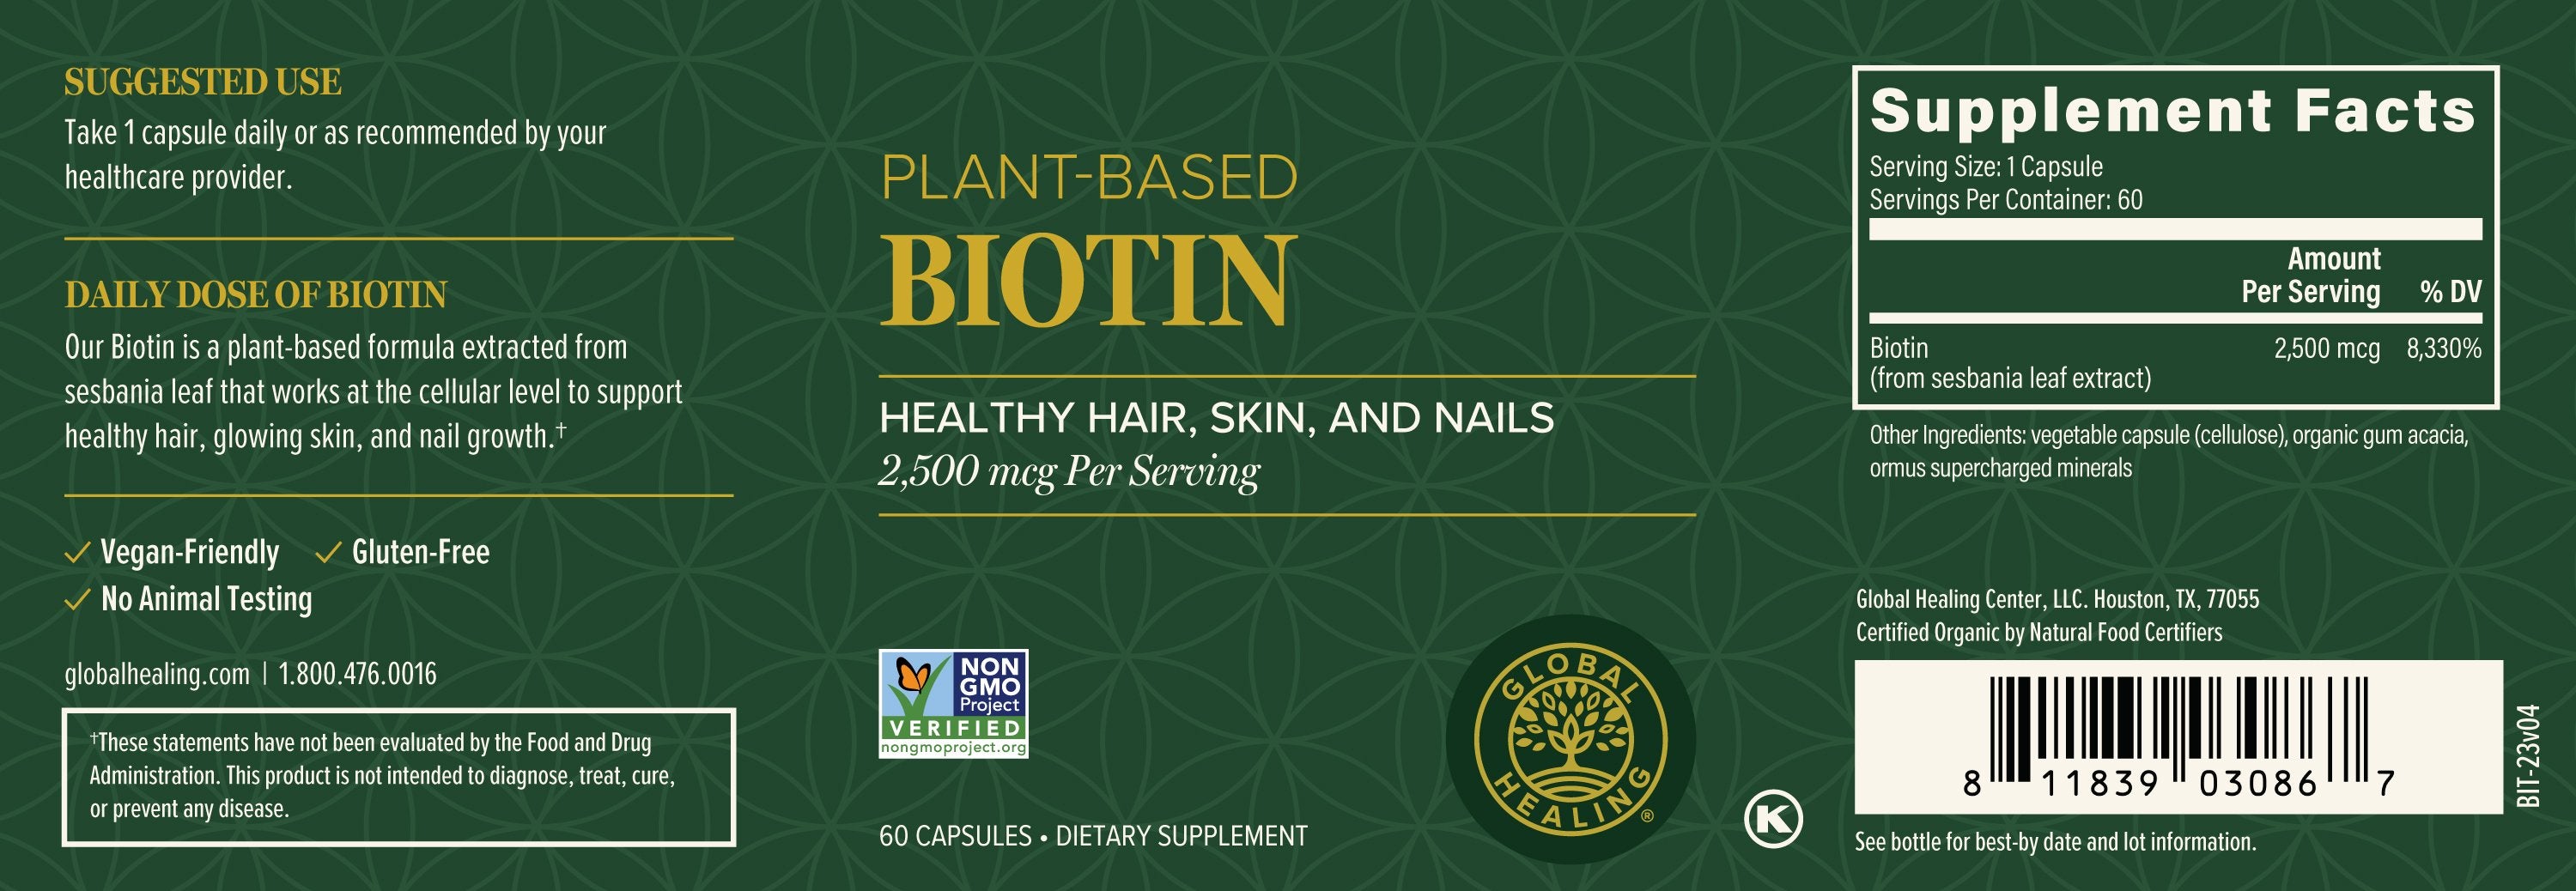 Global Healing Plant Based Biotin For Healthy Hair and Nails 60 Capsules Bottle Label